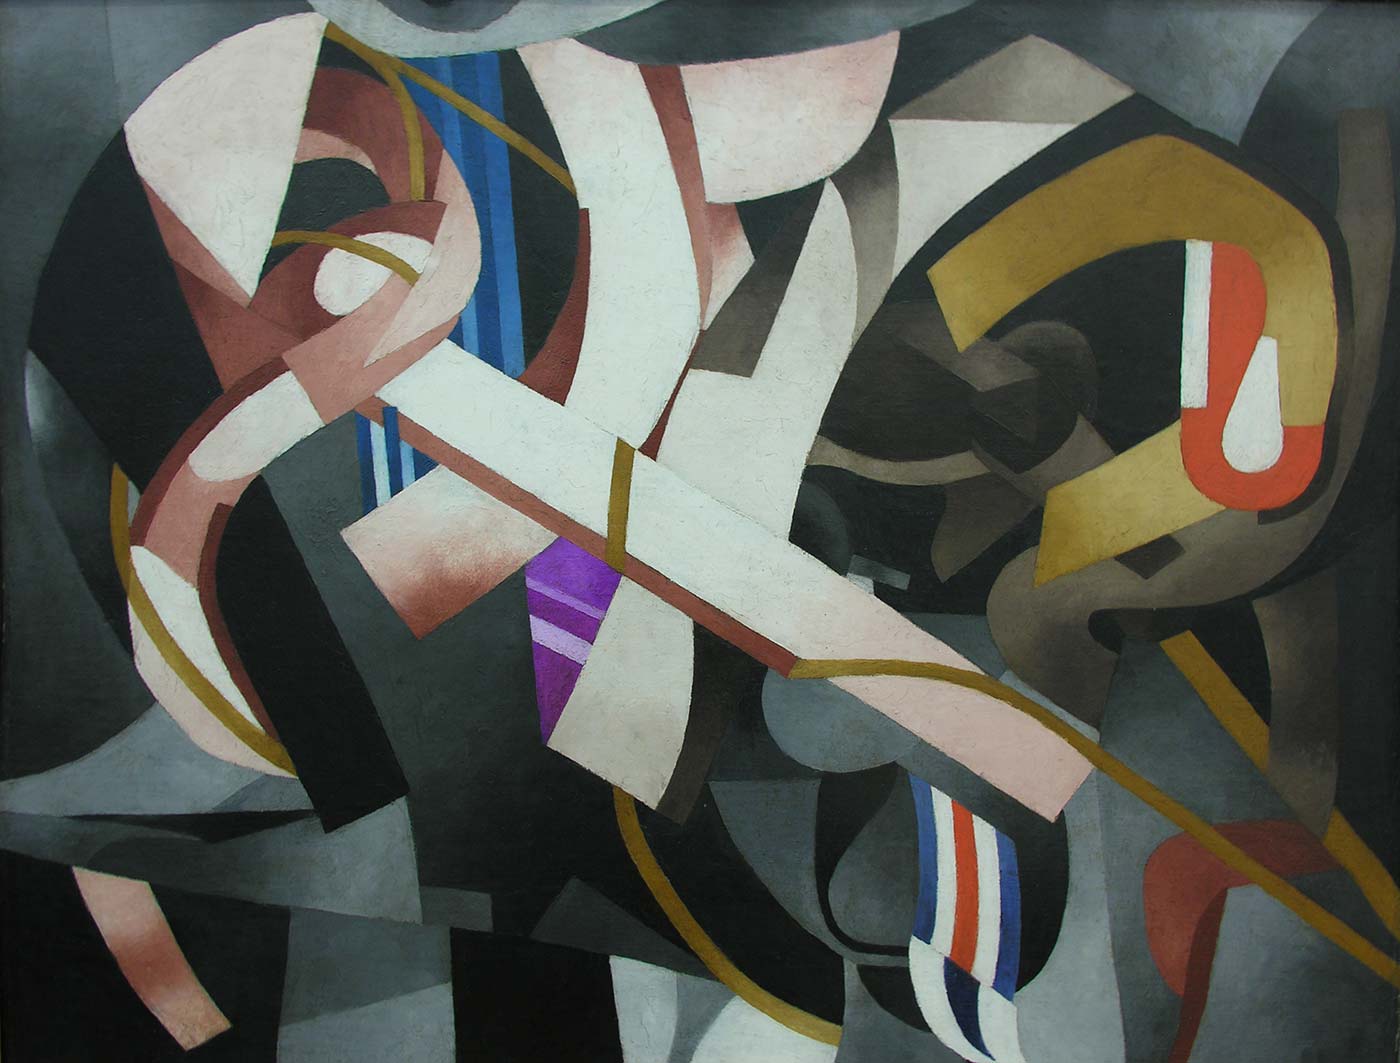 Francis Picabia: Physical Culture (1913)